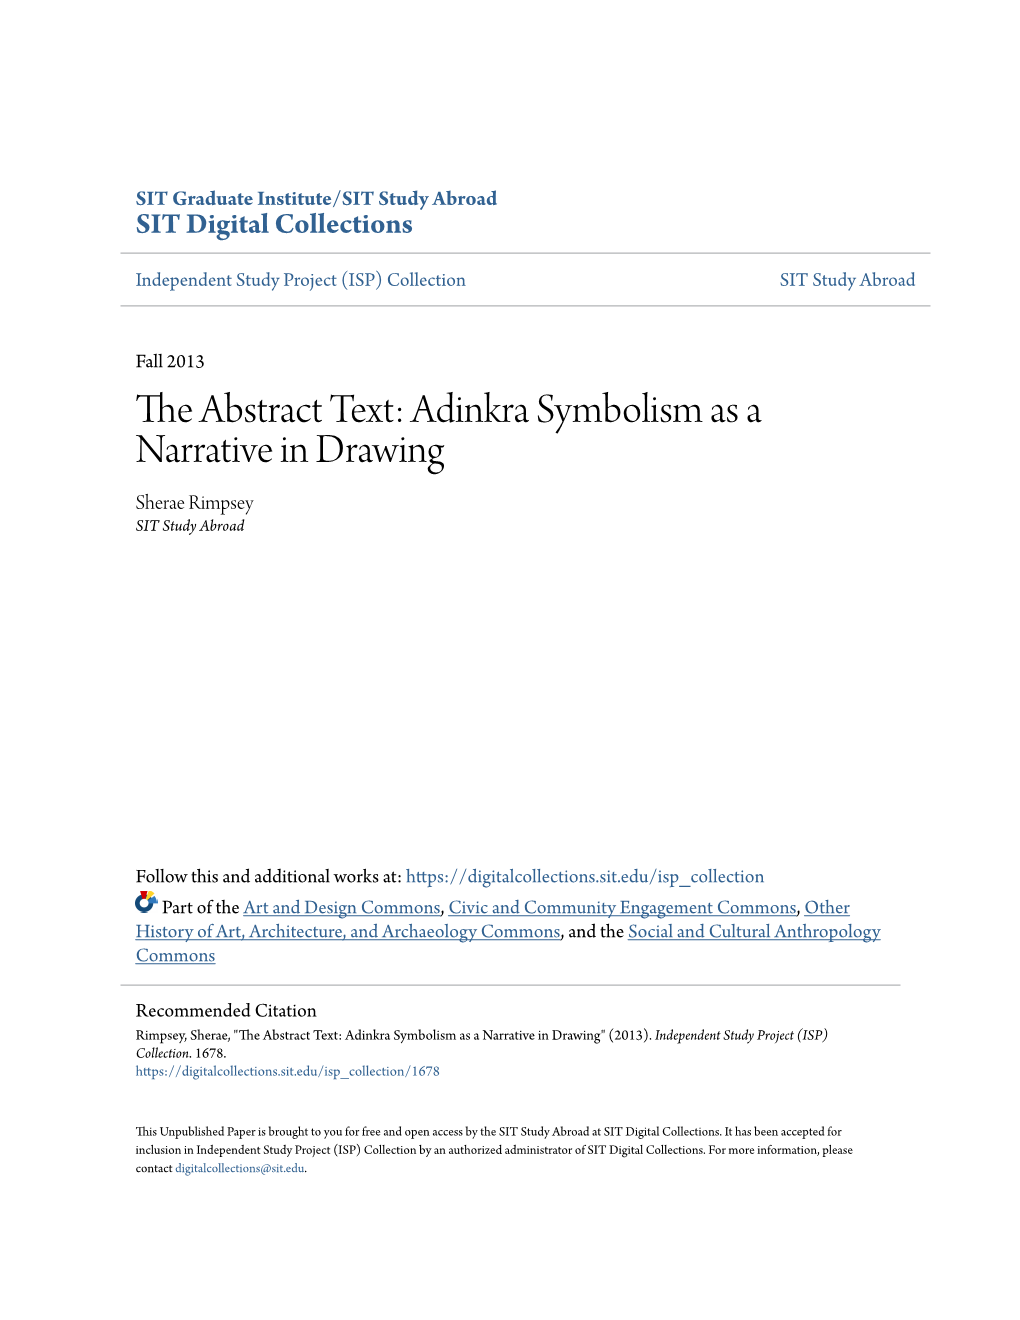 The Abstract Text: Adinkra Symbolism As a Narrative in Drawing Sherae Rimpsey SIT Study Abroad